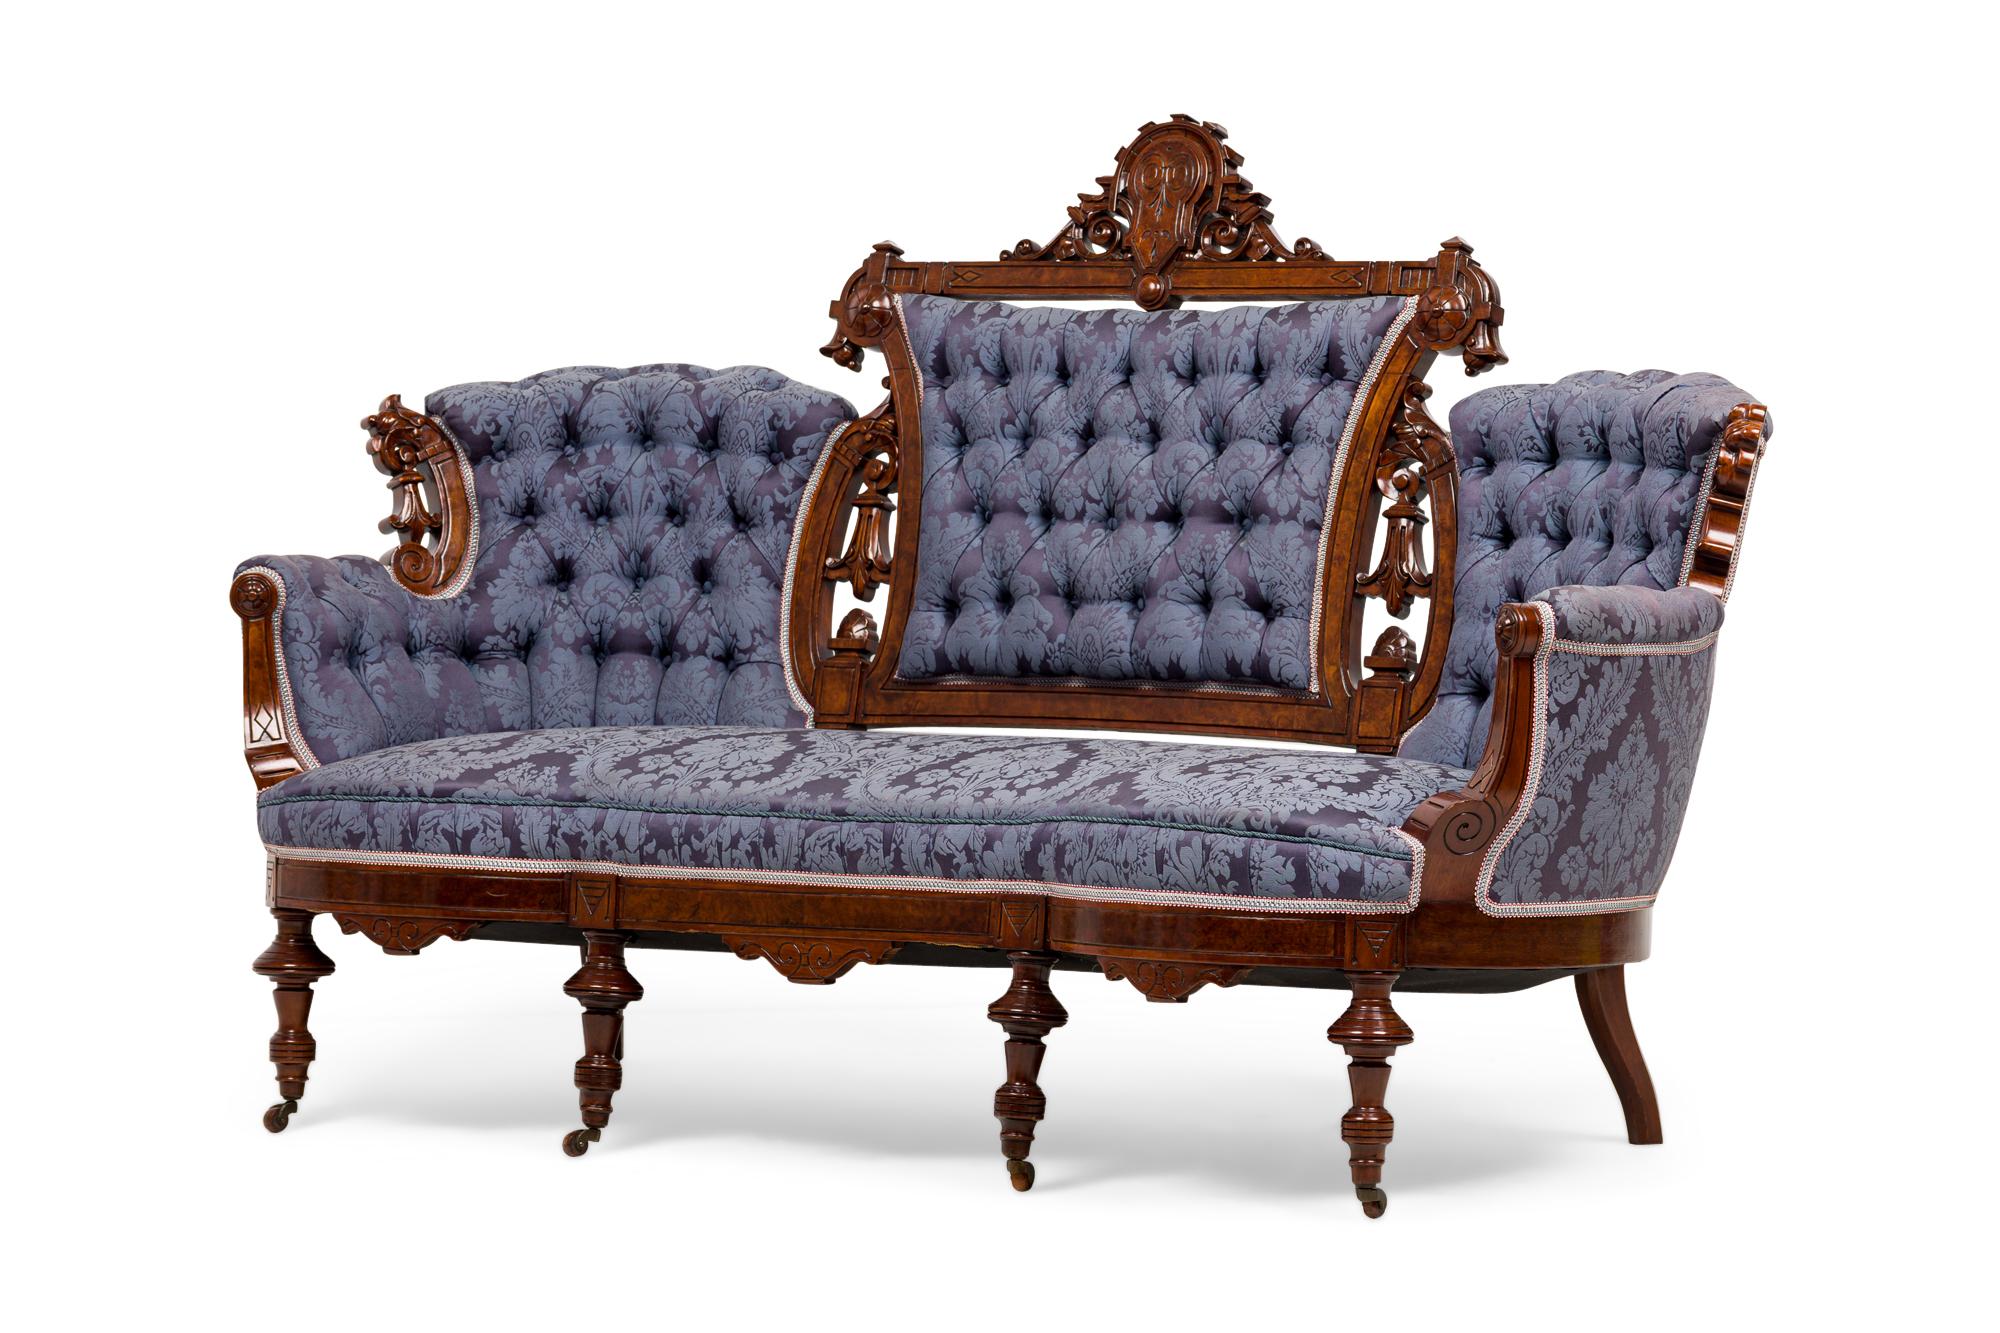 6 Piece American Victorian Blue Tufted Damask Mahogany Living Room Set In Good Condition For Sale In New York, NY